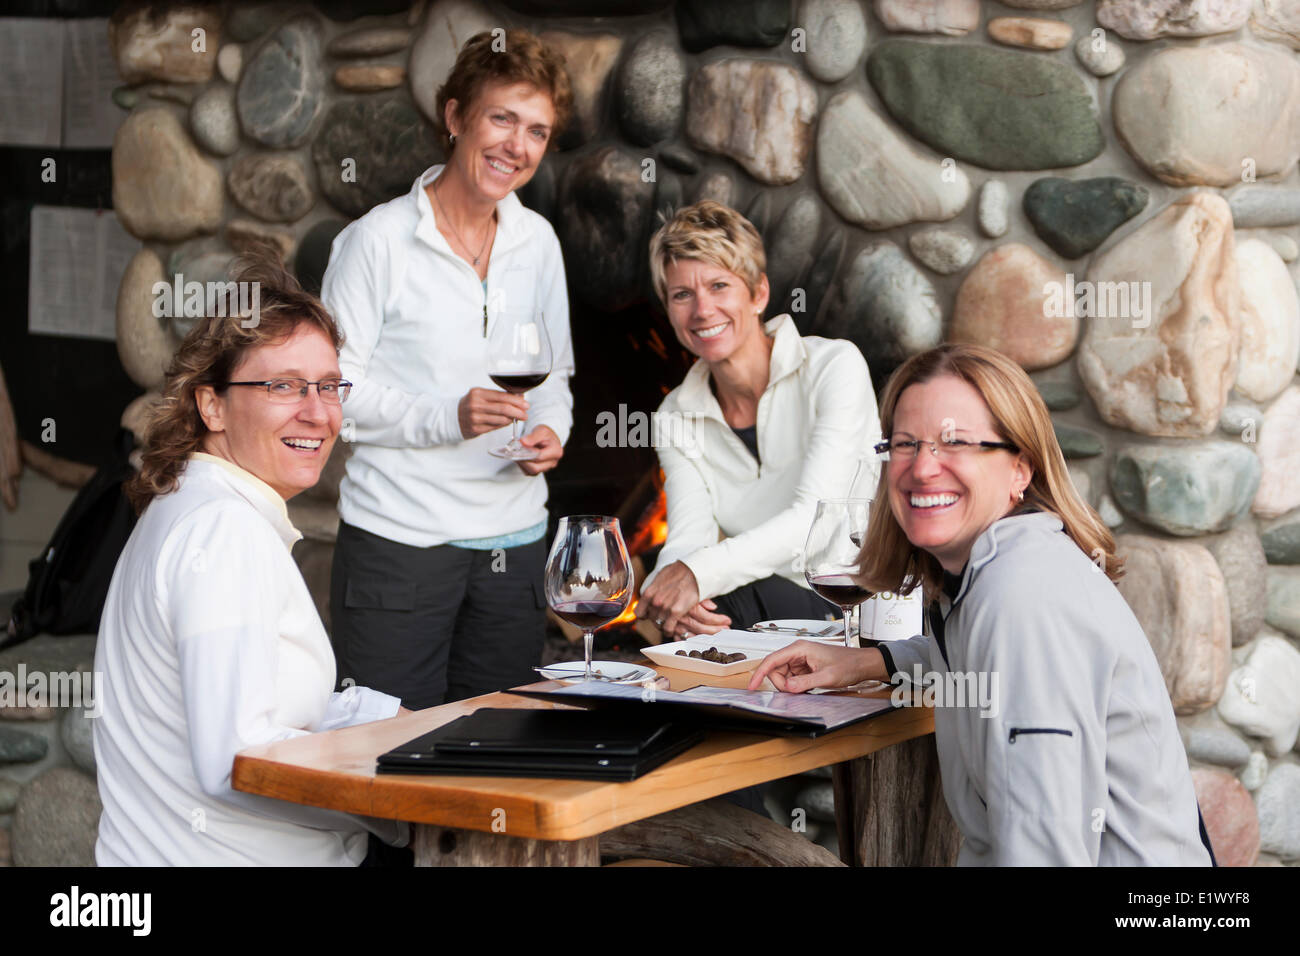 Four friends enjoy a glass wine conversation while waiting for a table at Sobo's an upscale eatery in Tofino.  Tofino Vancouver Stock Photo